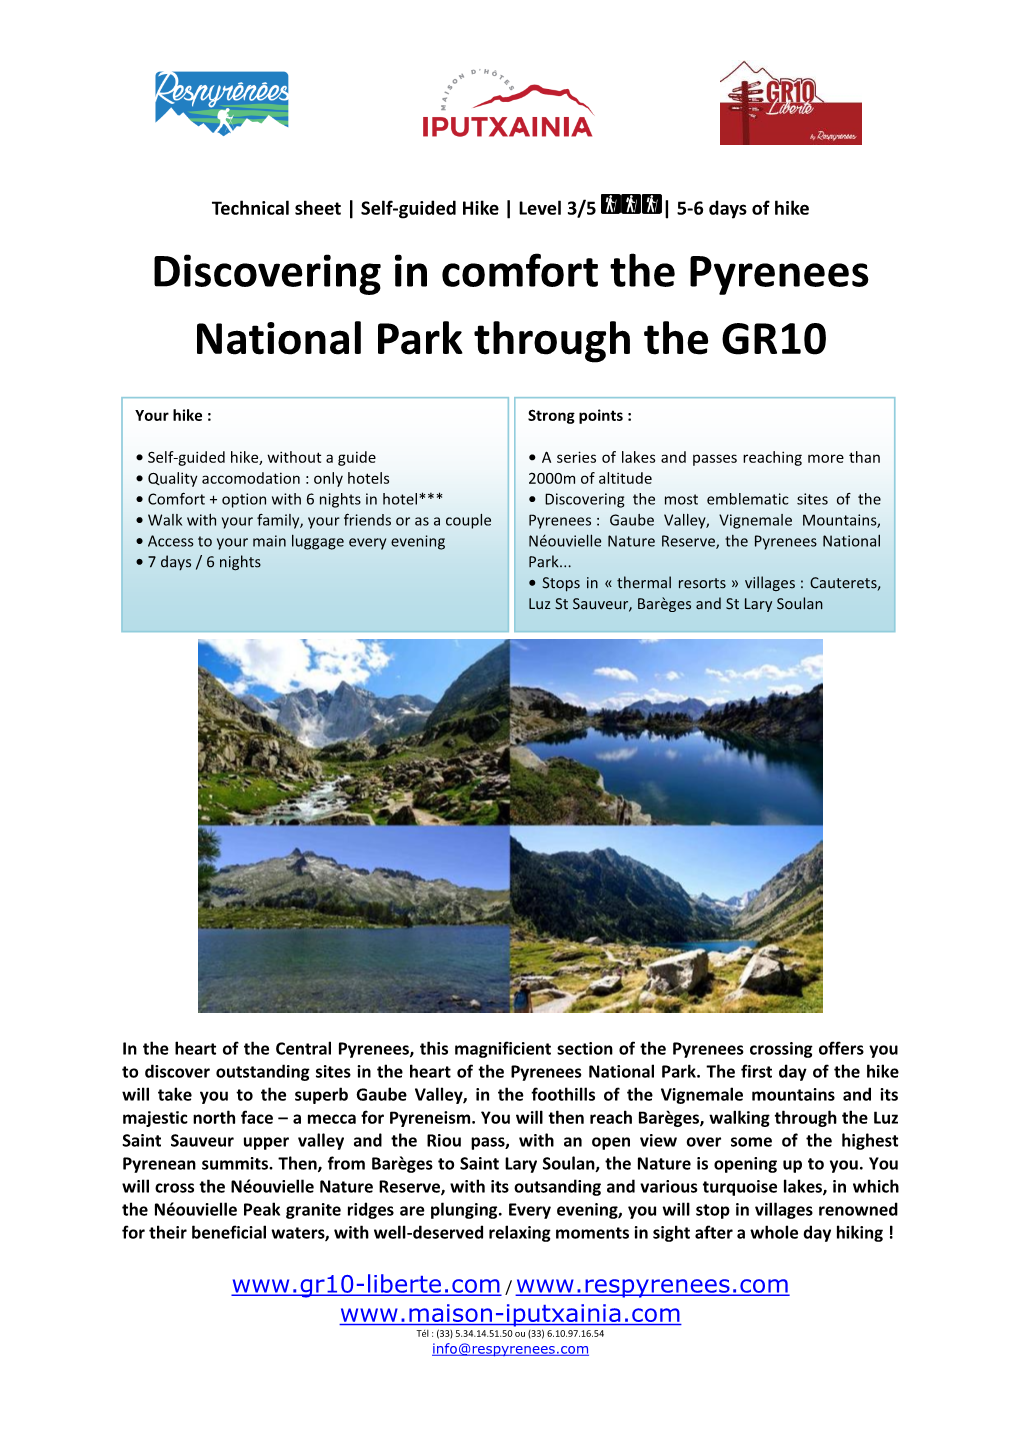 Discovering in Comfort the Pyrenees National Park Through the GR10